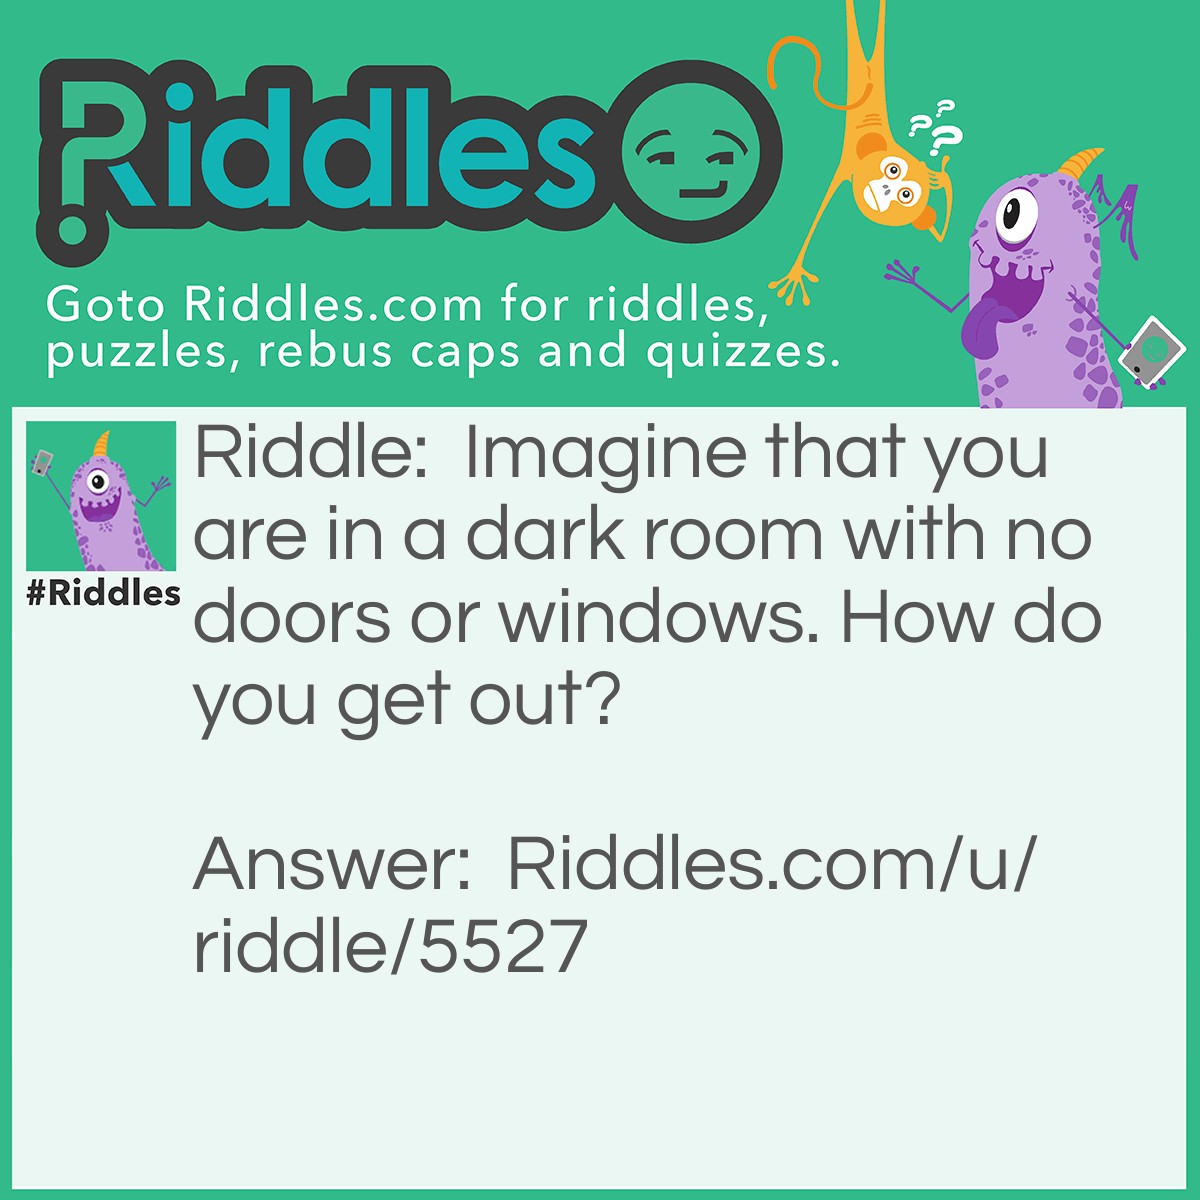 Riddle: Imagine that you are in a dark room with no doors or windows. How do you get out? Answer: Stop imagining.